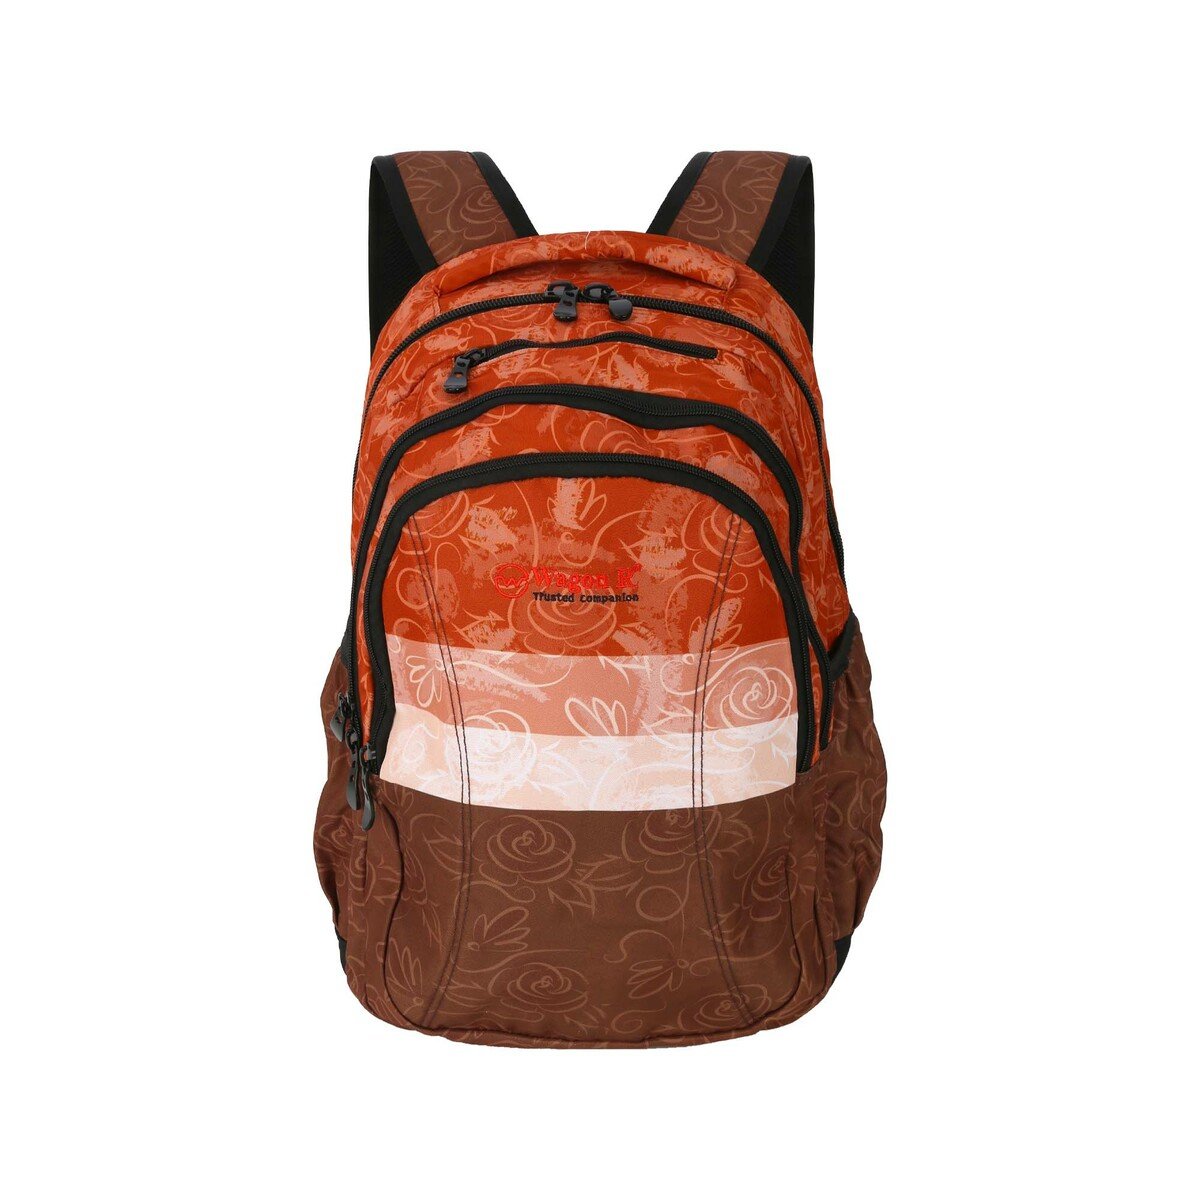 Wagon R Printed Backpack B1902-1 19inch Assorted Designs